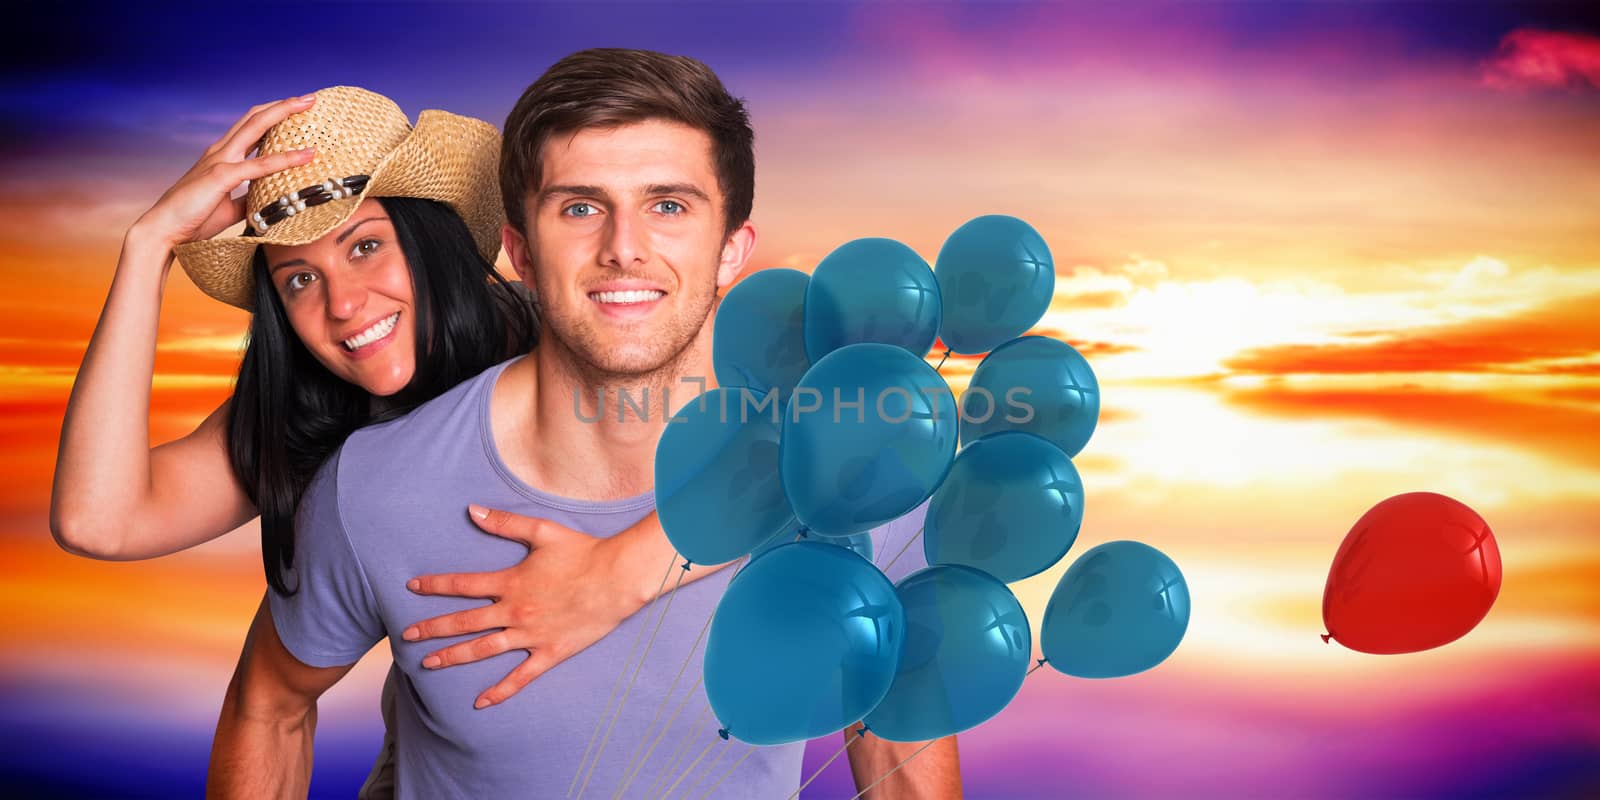 Man giving his pretty girlfriend a piggy back against purple sky with orange clouds